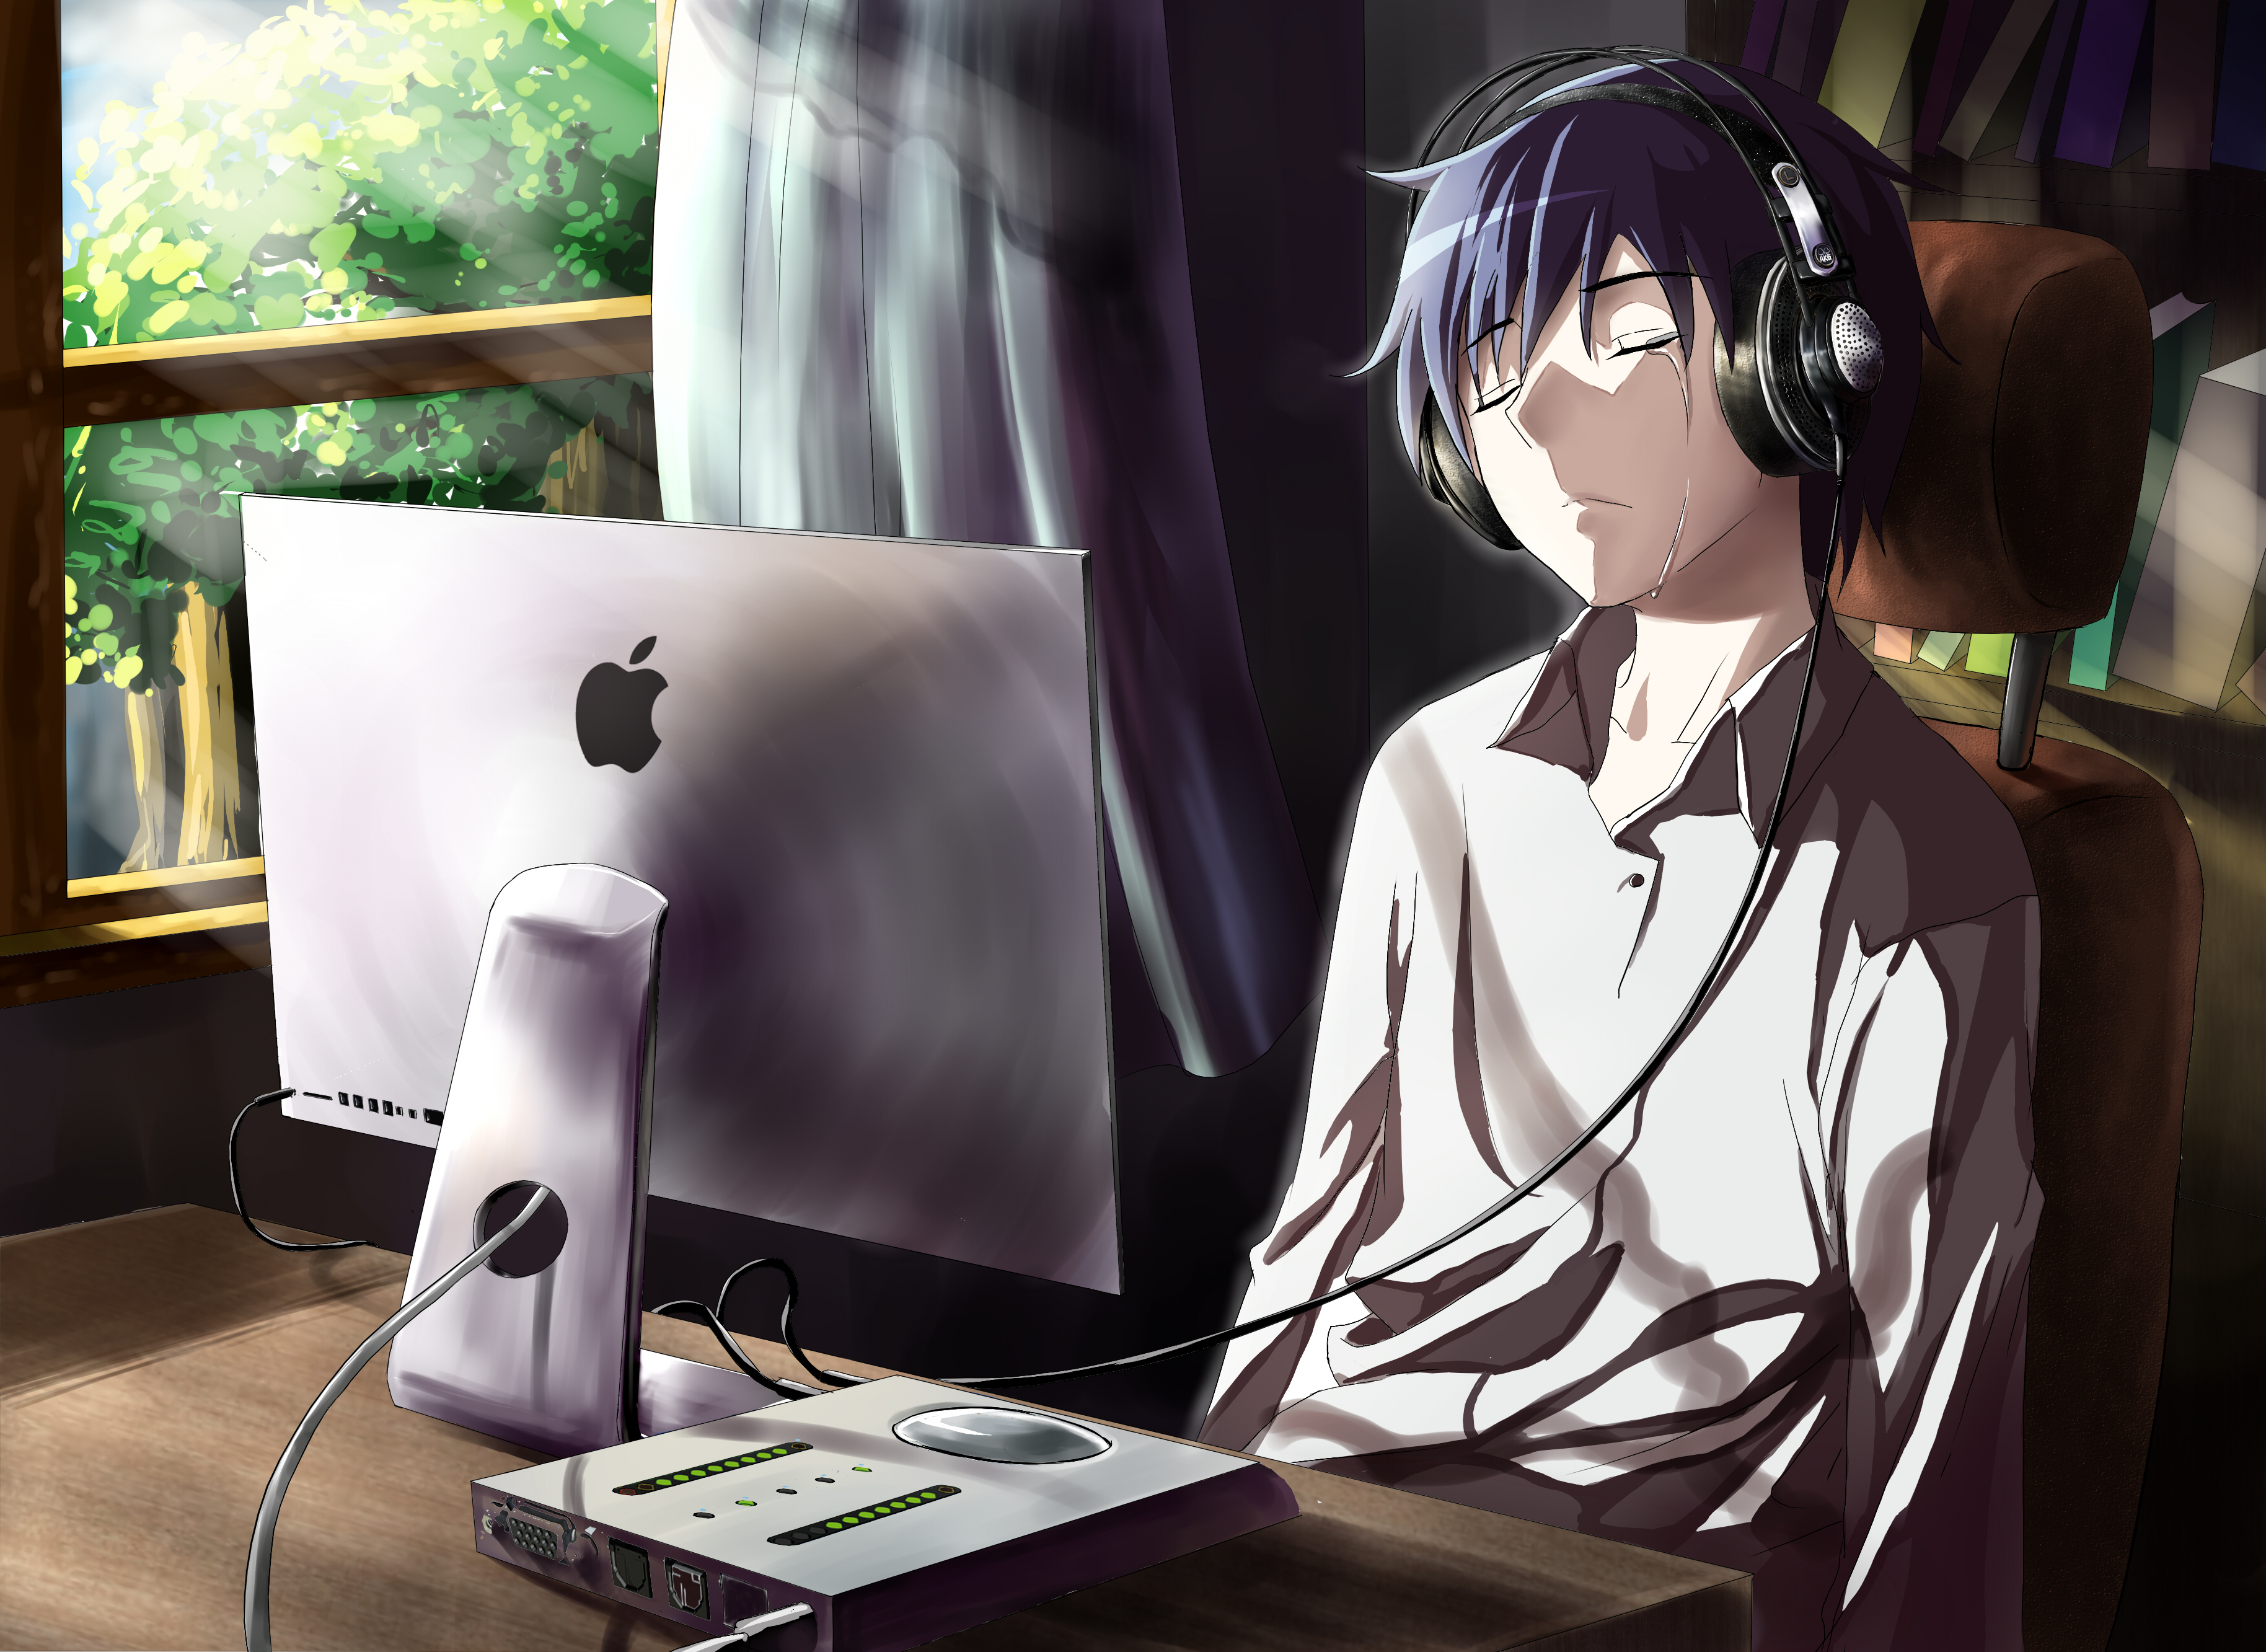 84096 download wallpaper anime, sadness, room, guy, sorrow, computer, tears screensavers and pictures for free